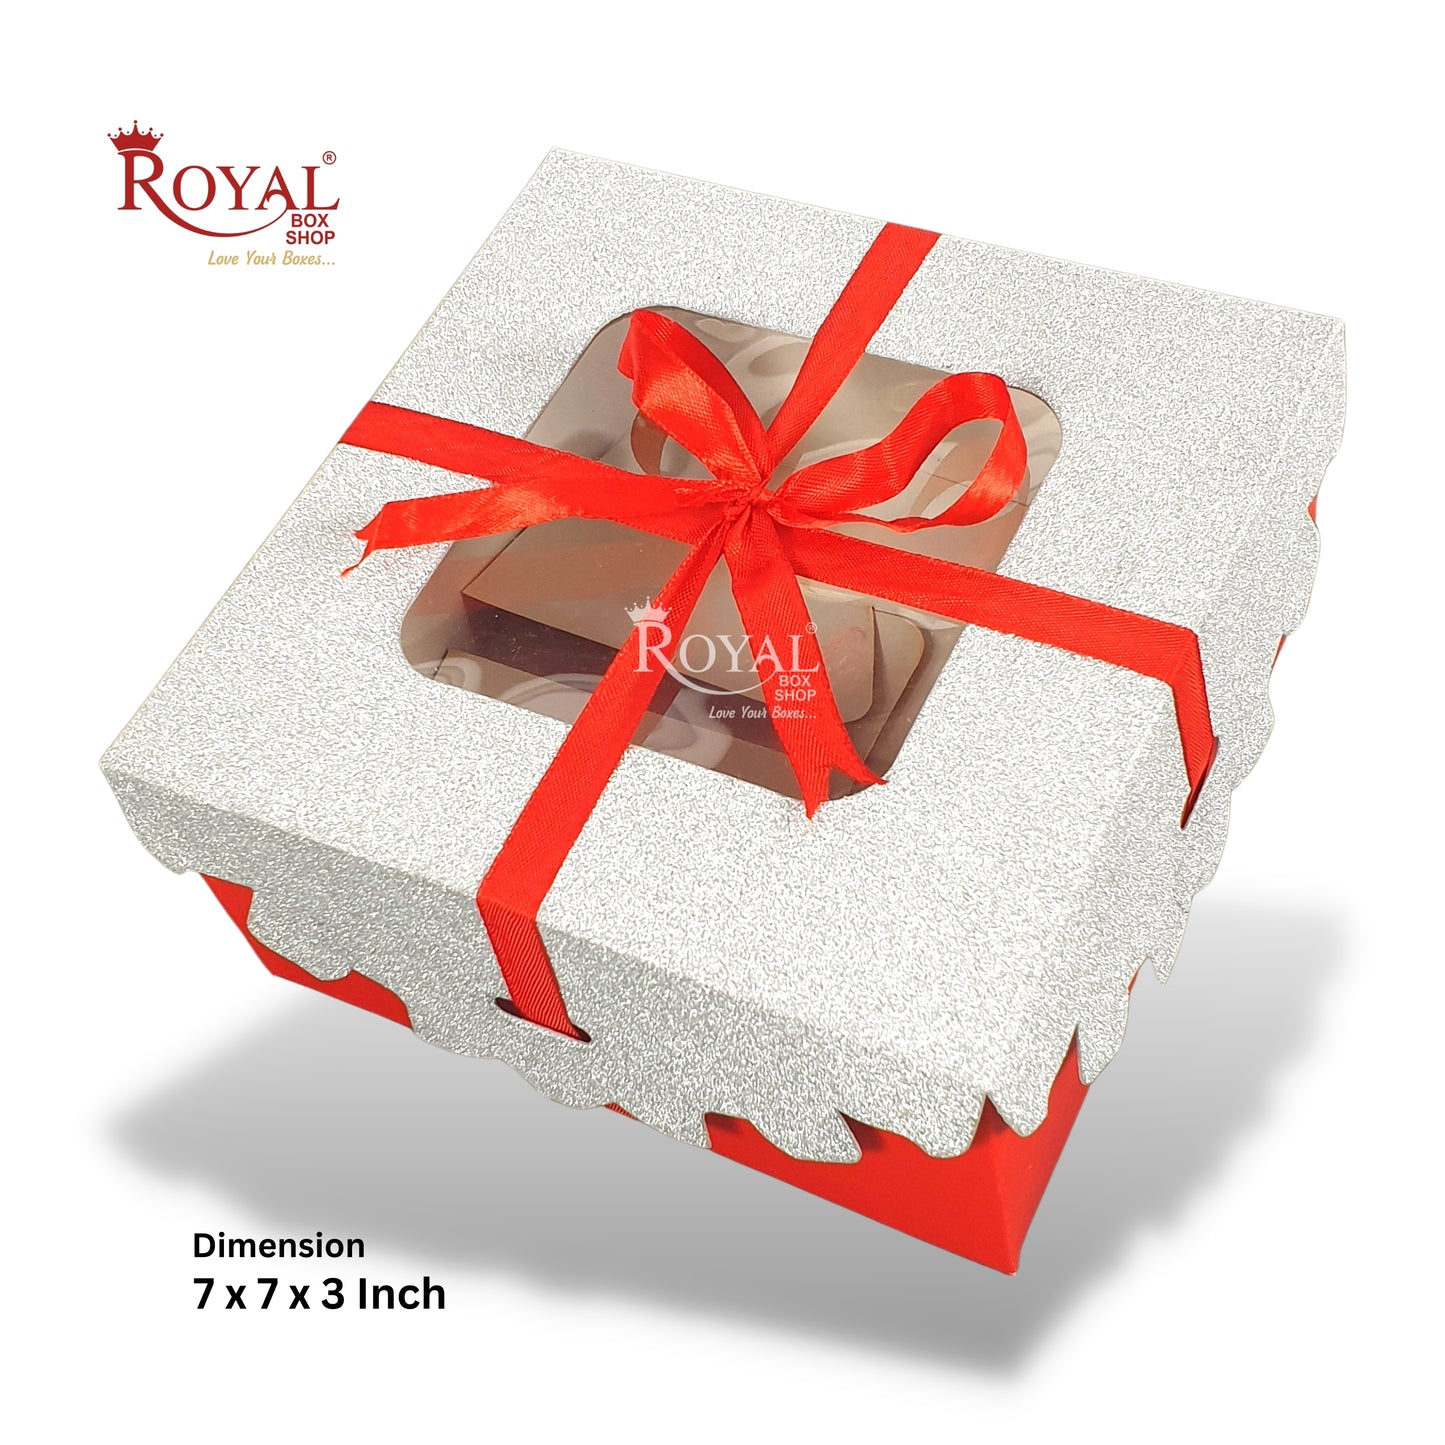 Christmas Cake Box I 7"x7"x3"inches I Red with Silver Top I For Dry Cake, Plum Cake, Xmas Gifting